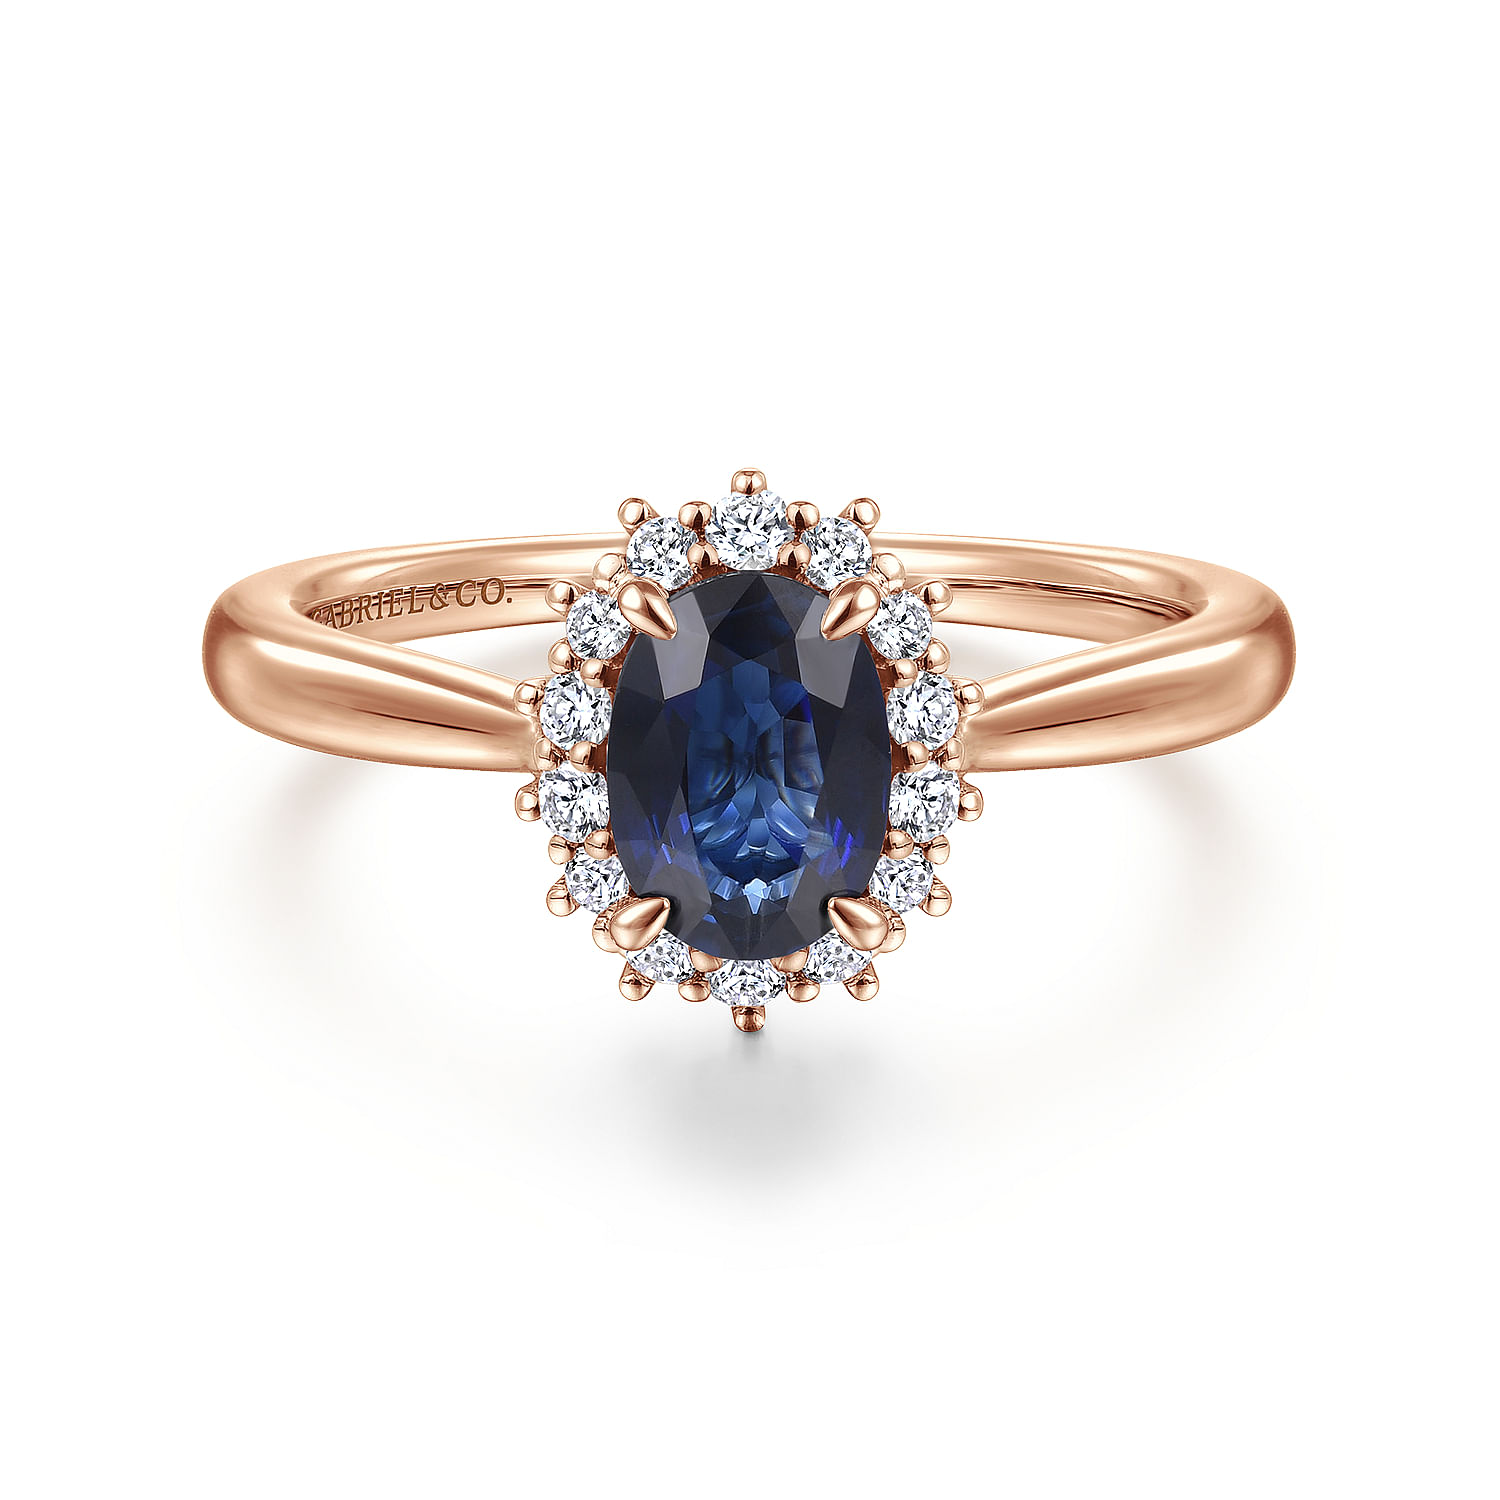 Gabriel - 14K Rose Gold Oval Halo Diamond and Sapphire Engagement Ring